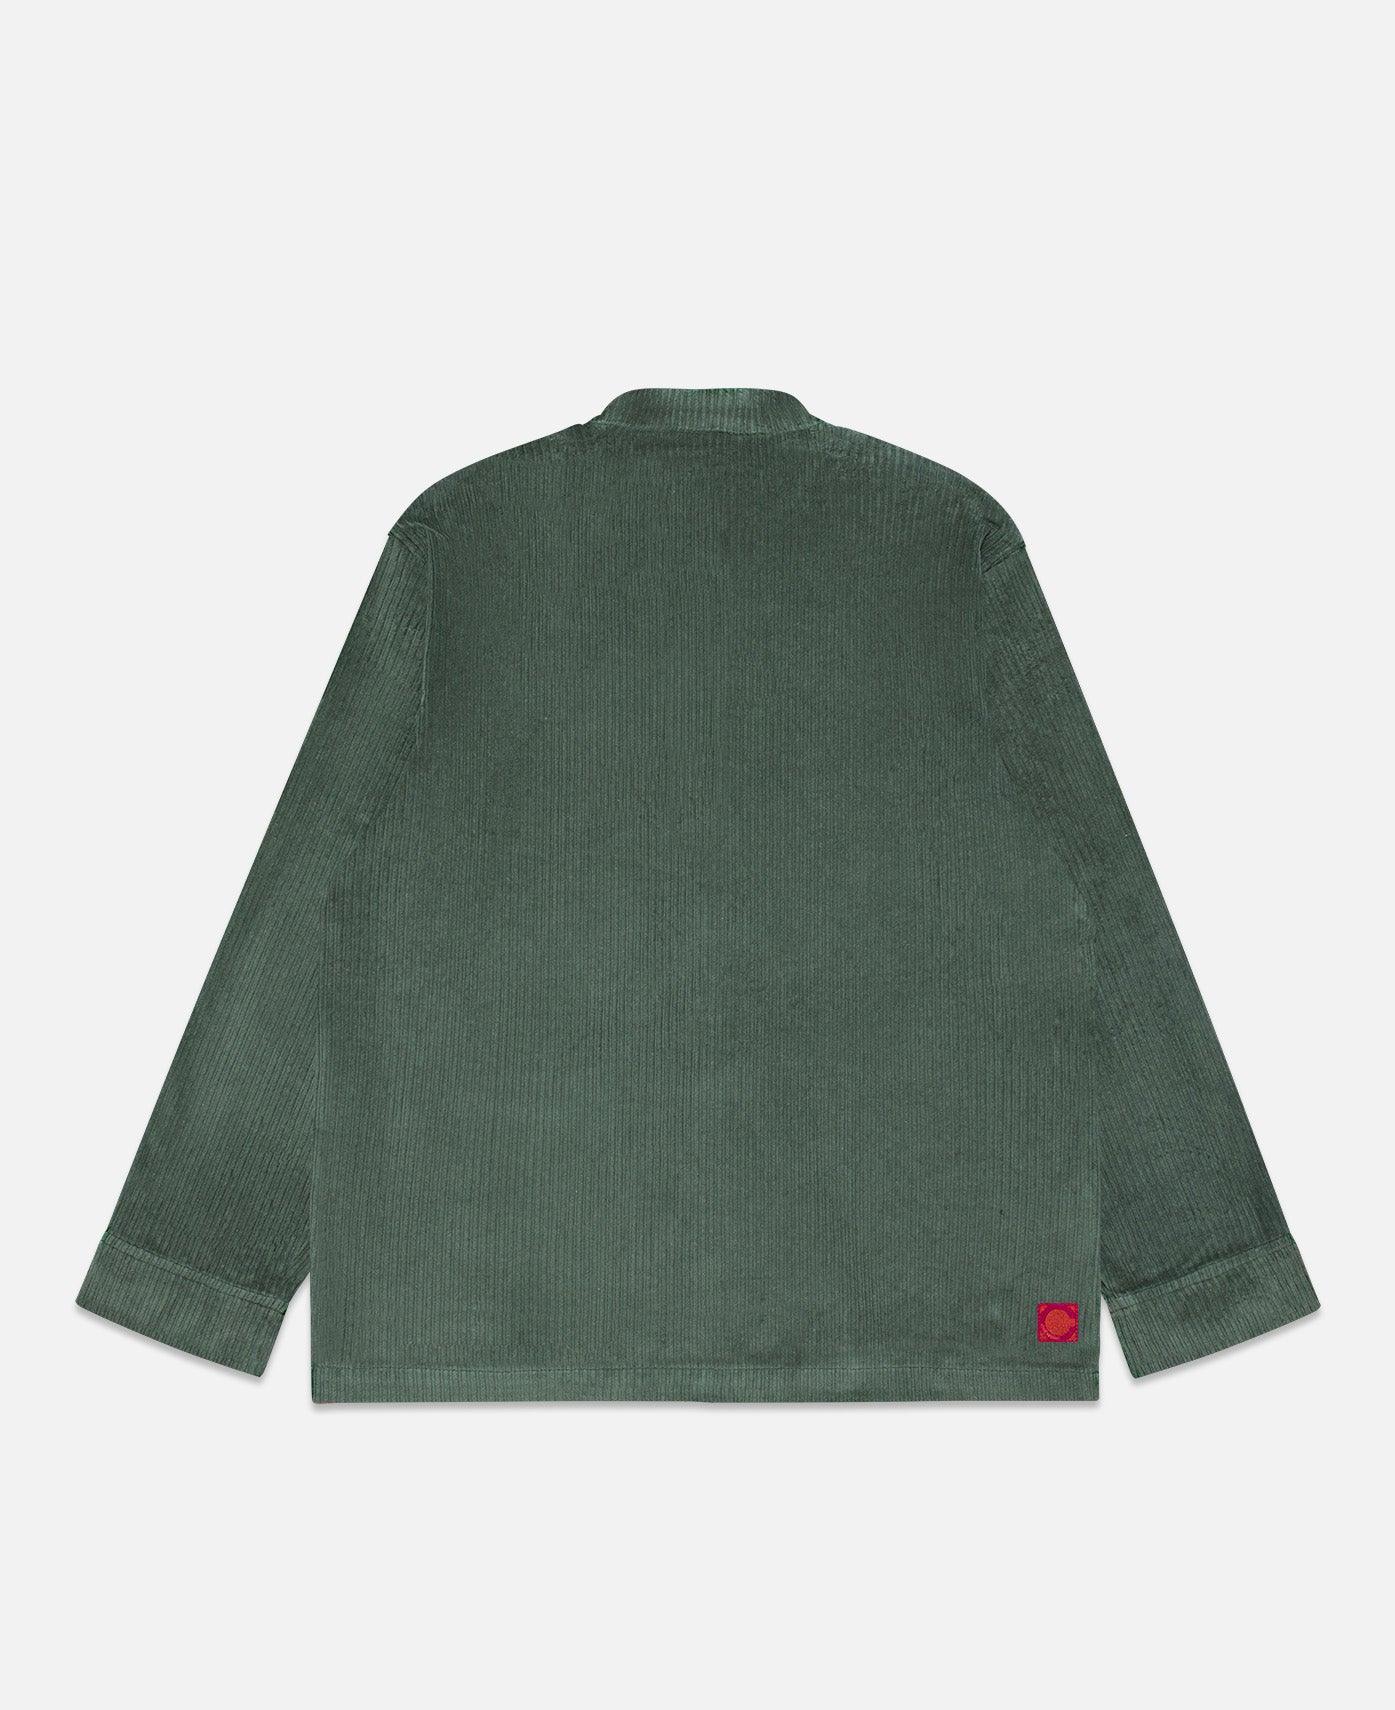 CLOT | Drop Out Store | NZ | Chinese Jacket - Green Corduroy